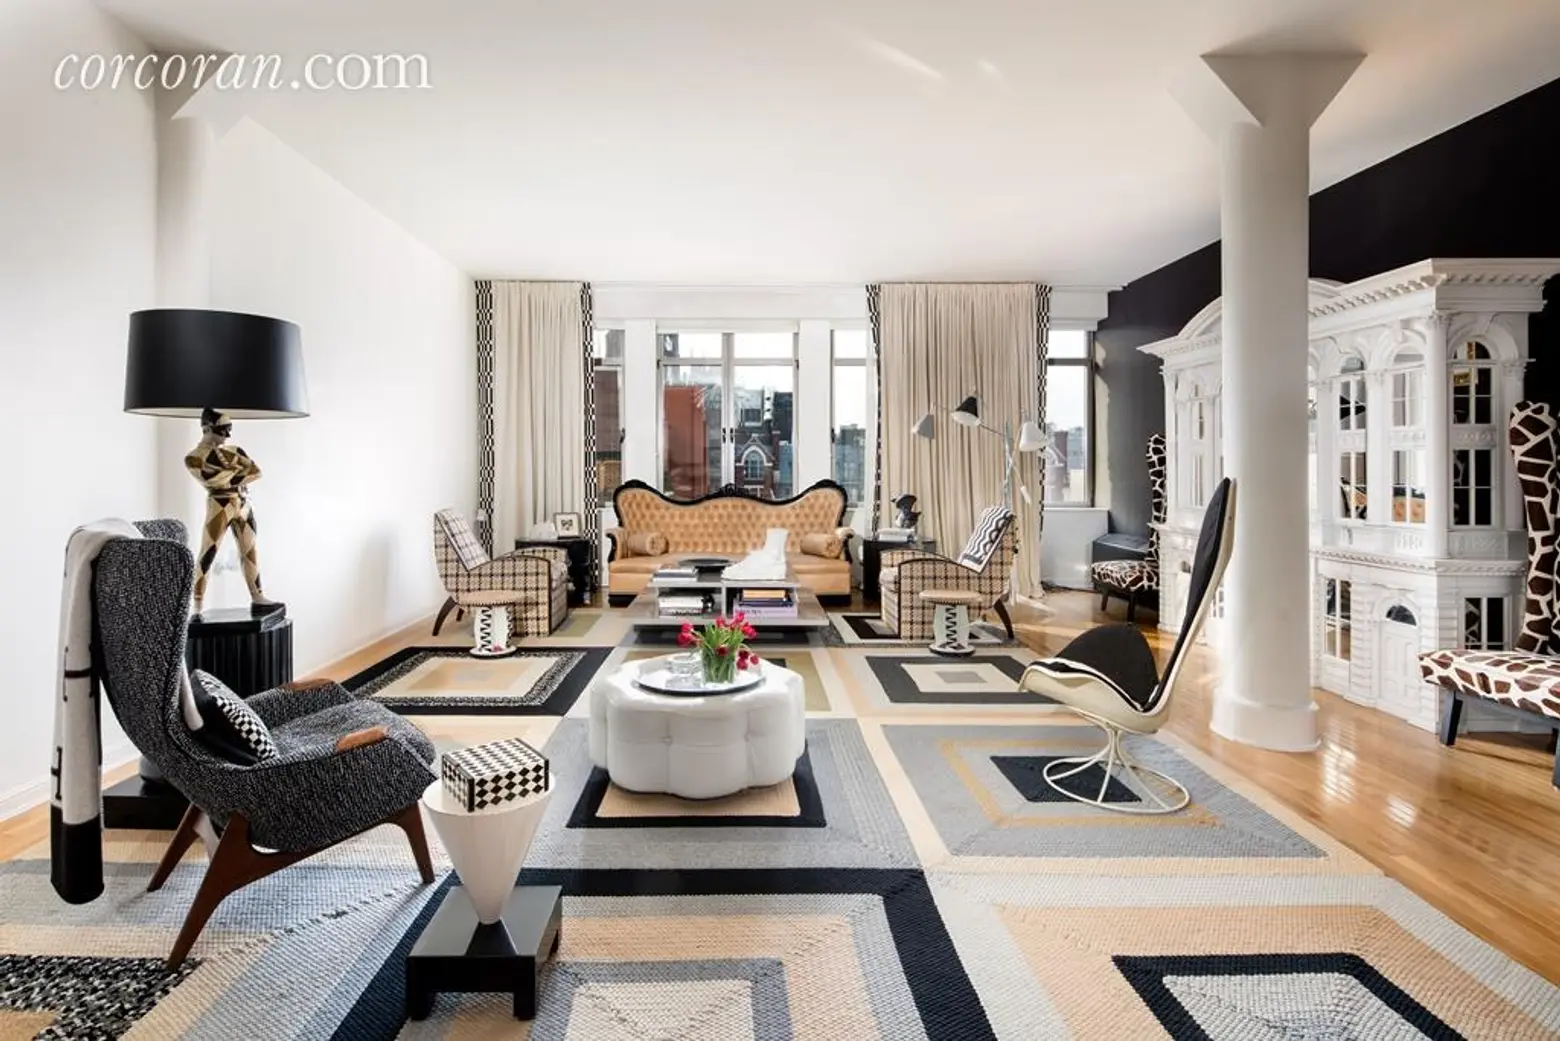 This $3M Chelsea Loft Condo Works Two Ways, Depending on Your Lifestyle